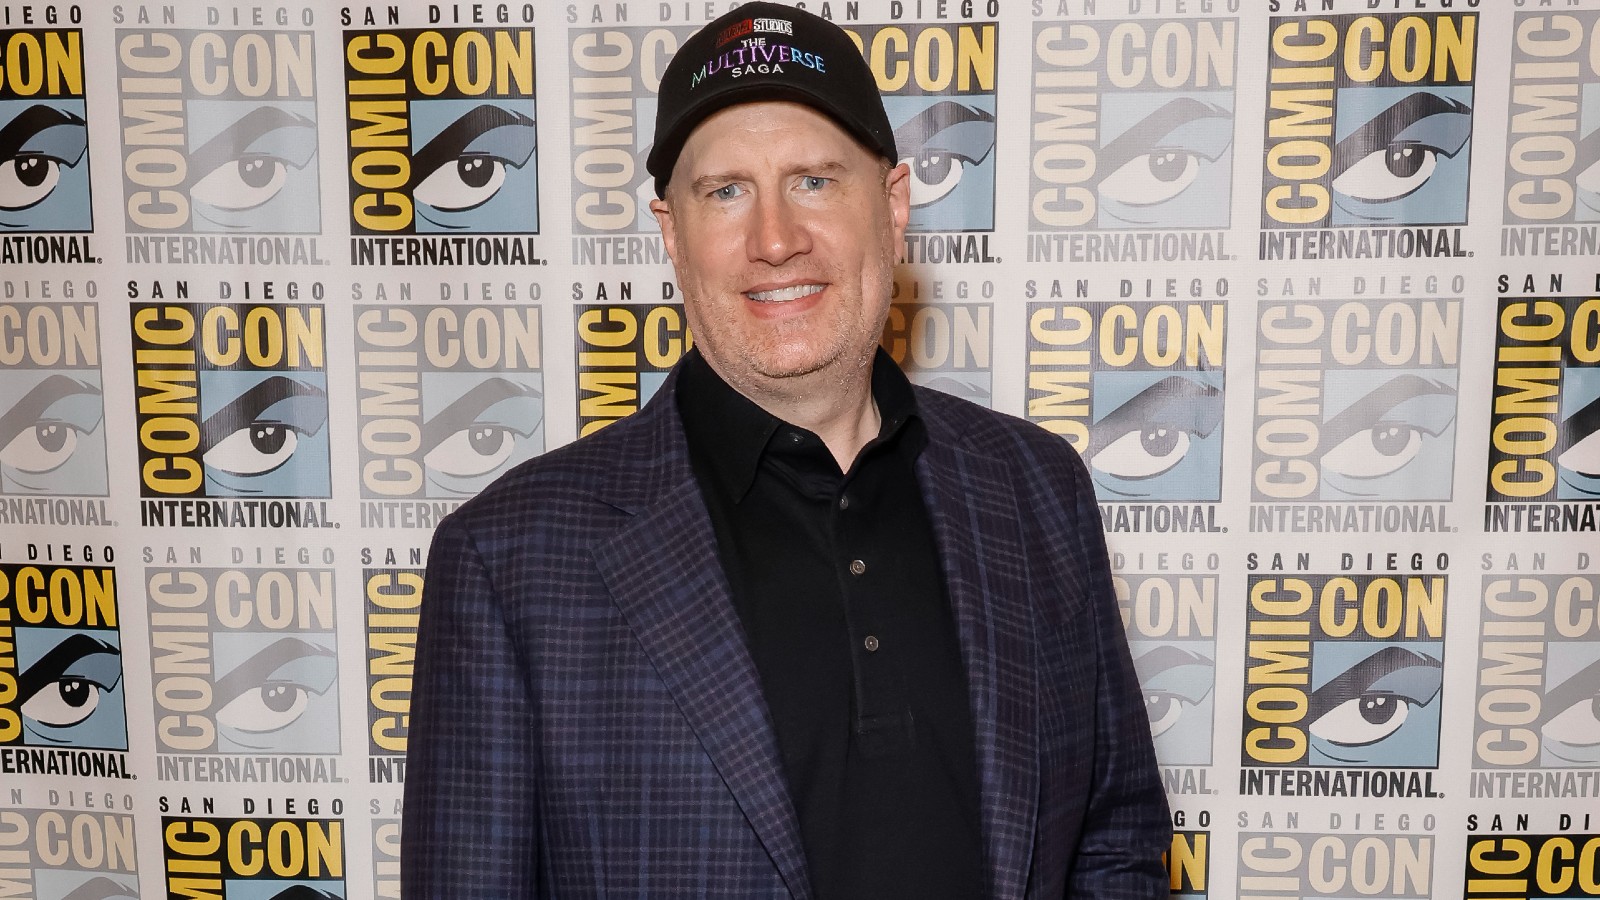 Kevin Feige wears a purple blazer and ballcap at Sand Diego Comic-Con.